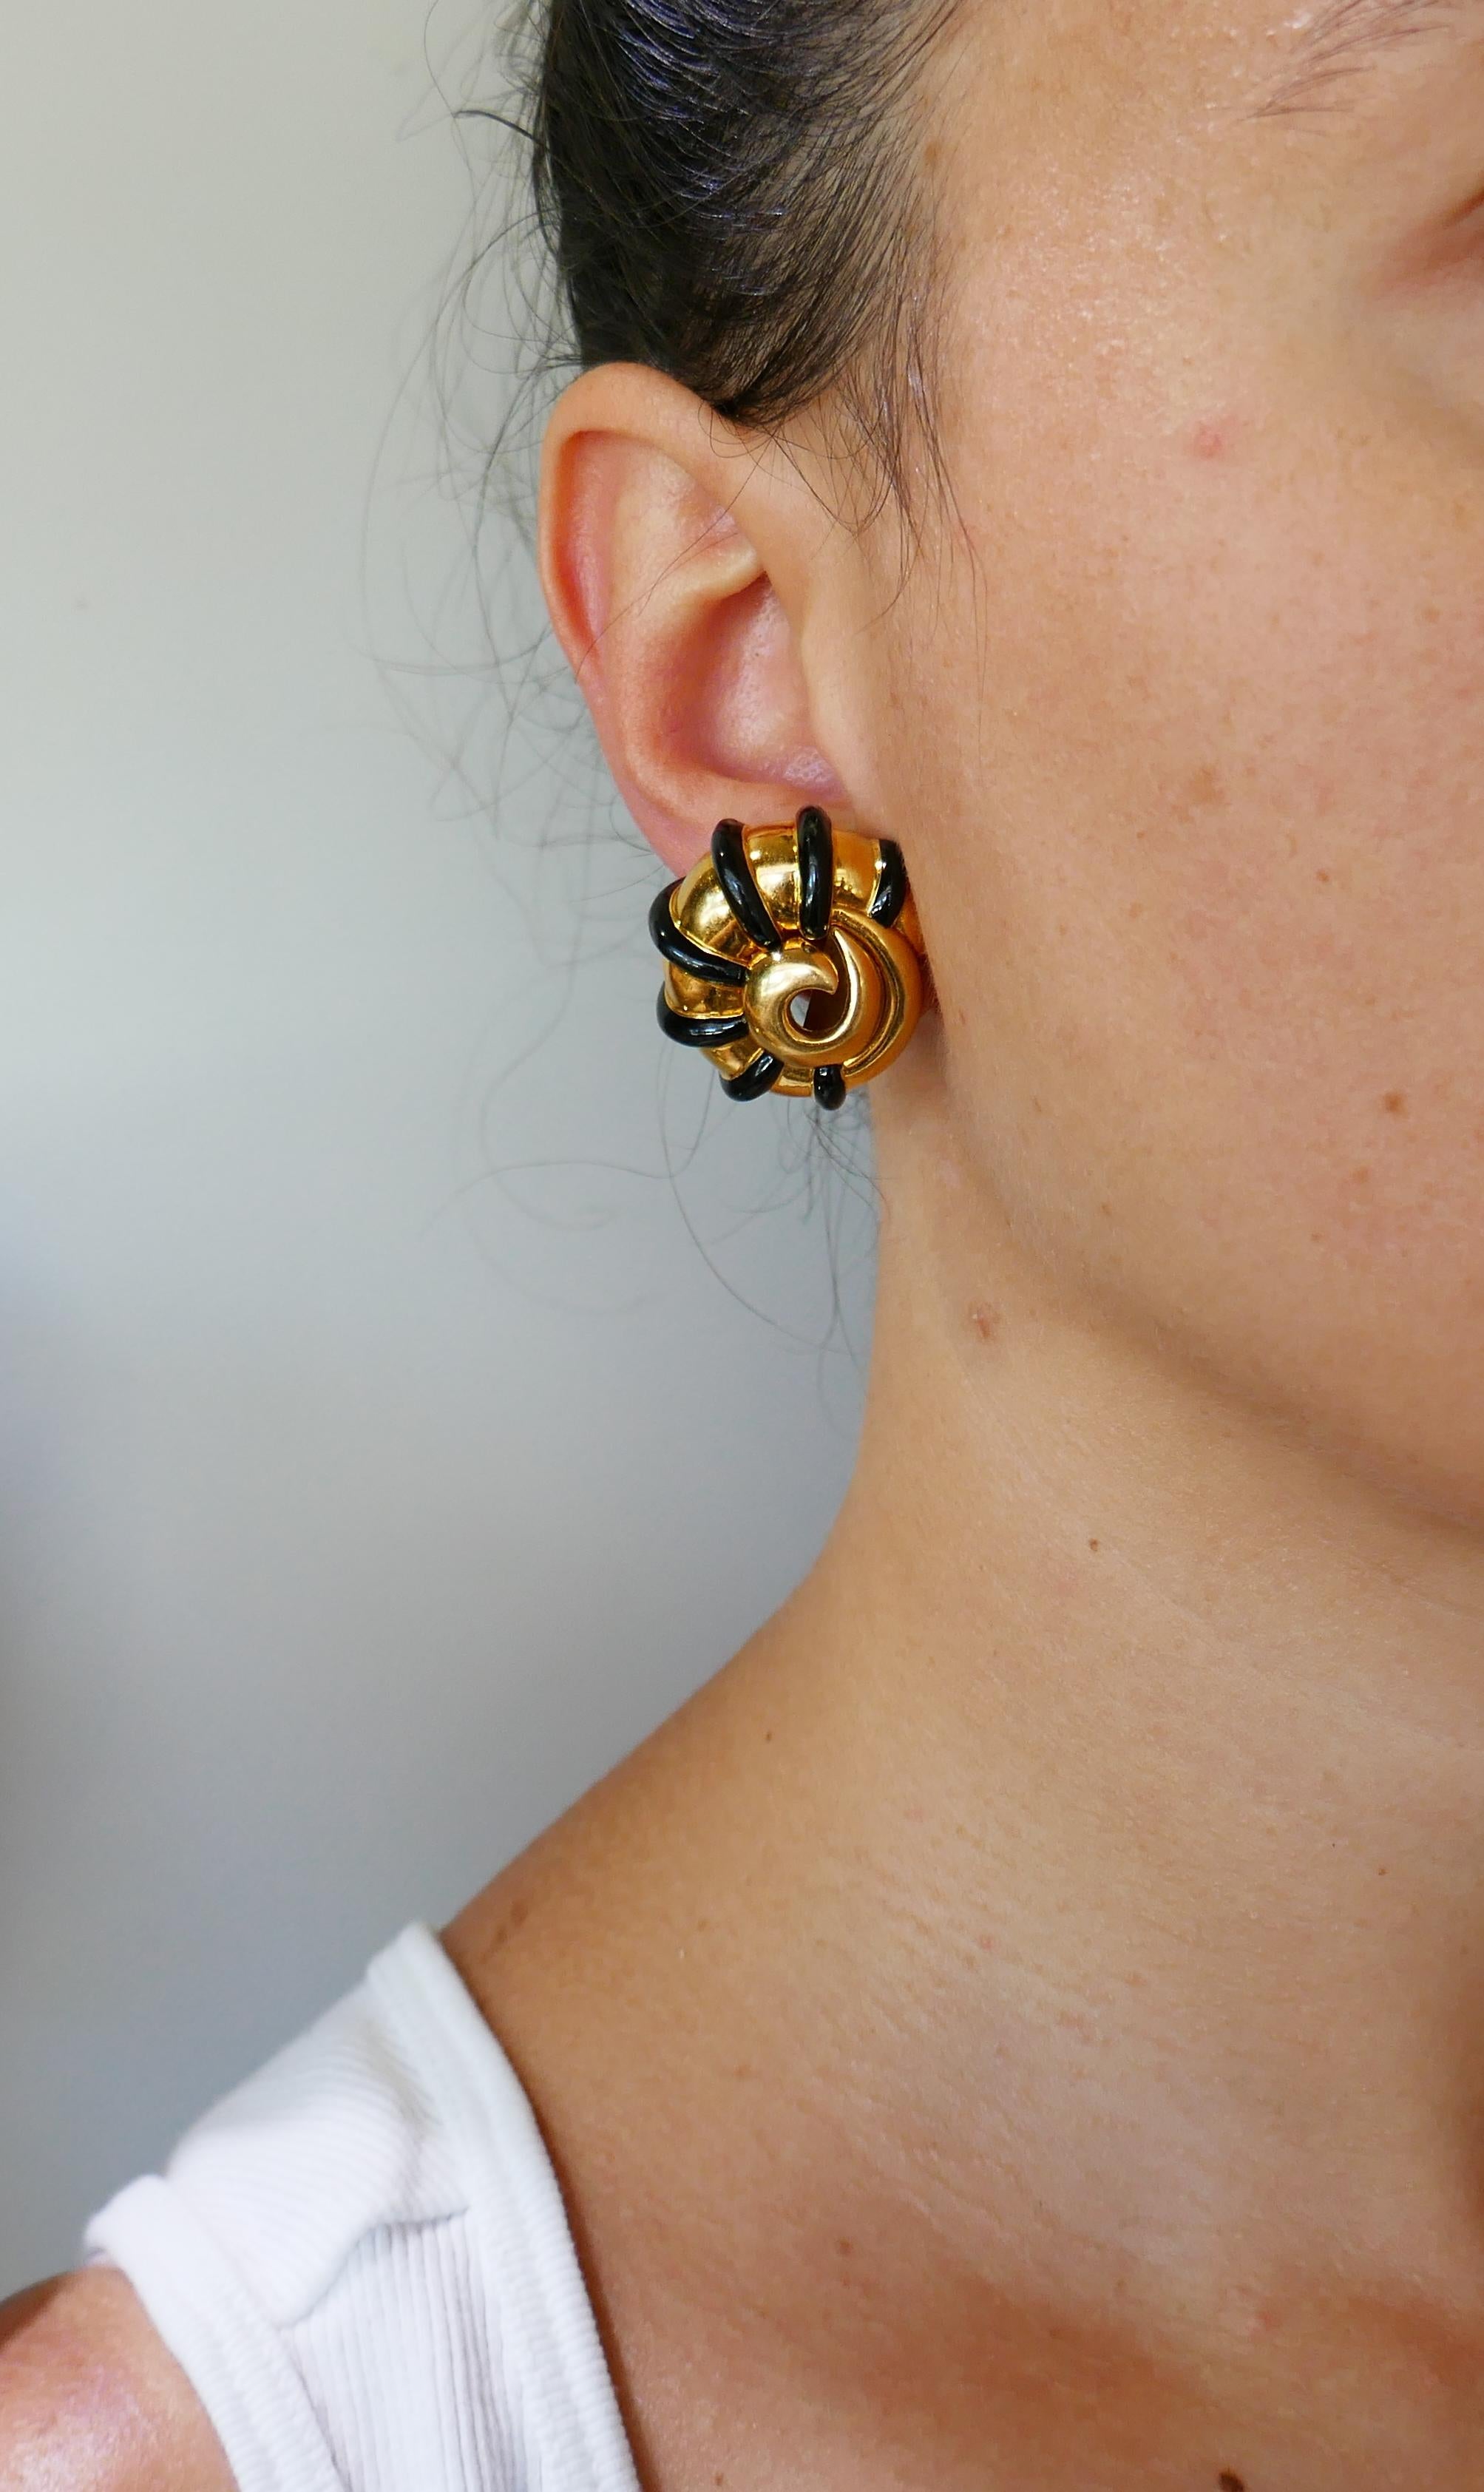 Edgy yet elegant pair of earrings created by Marilyn Cooperman in the 1980s.  Stylish, chic and wearable, the earrings are a great addition to your jewelry collection. 
The earrings are made of 18 karat yellow gold and black enamel.
The earrings